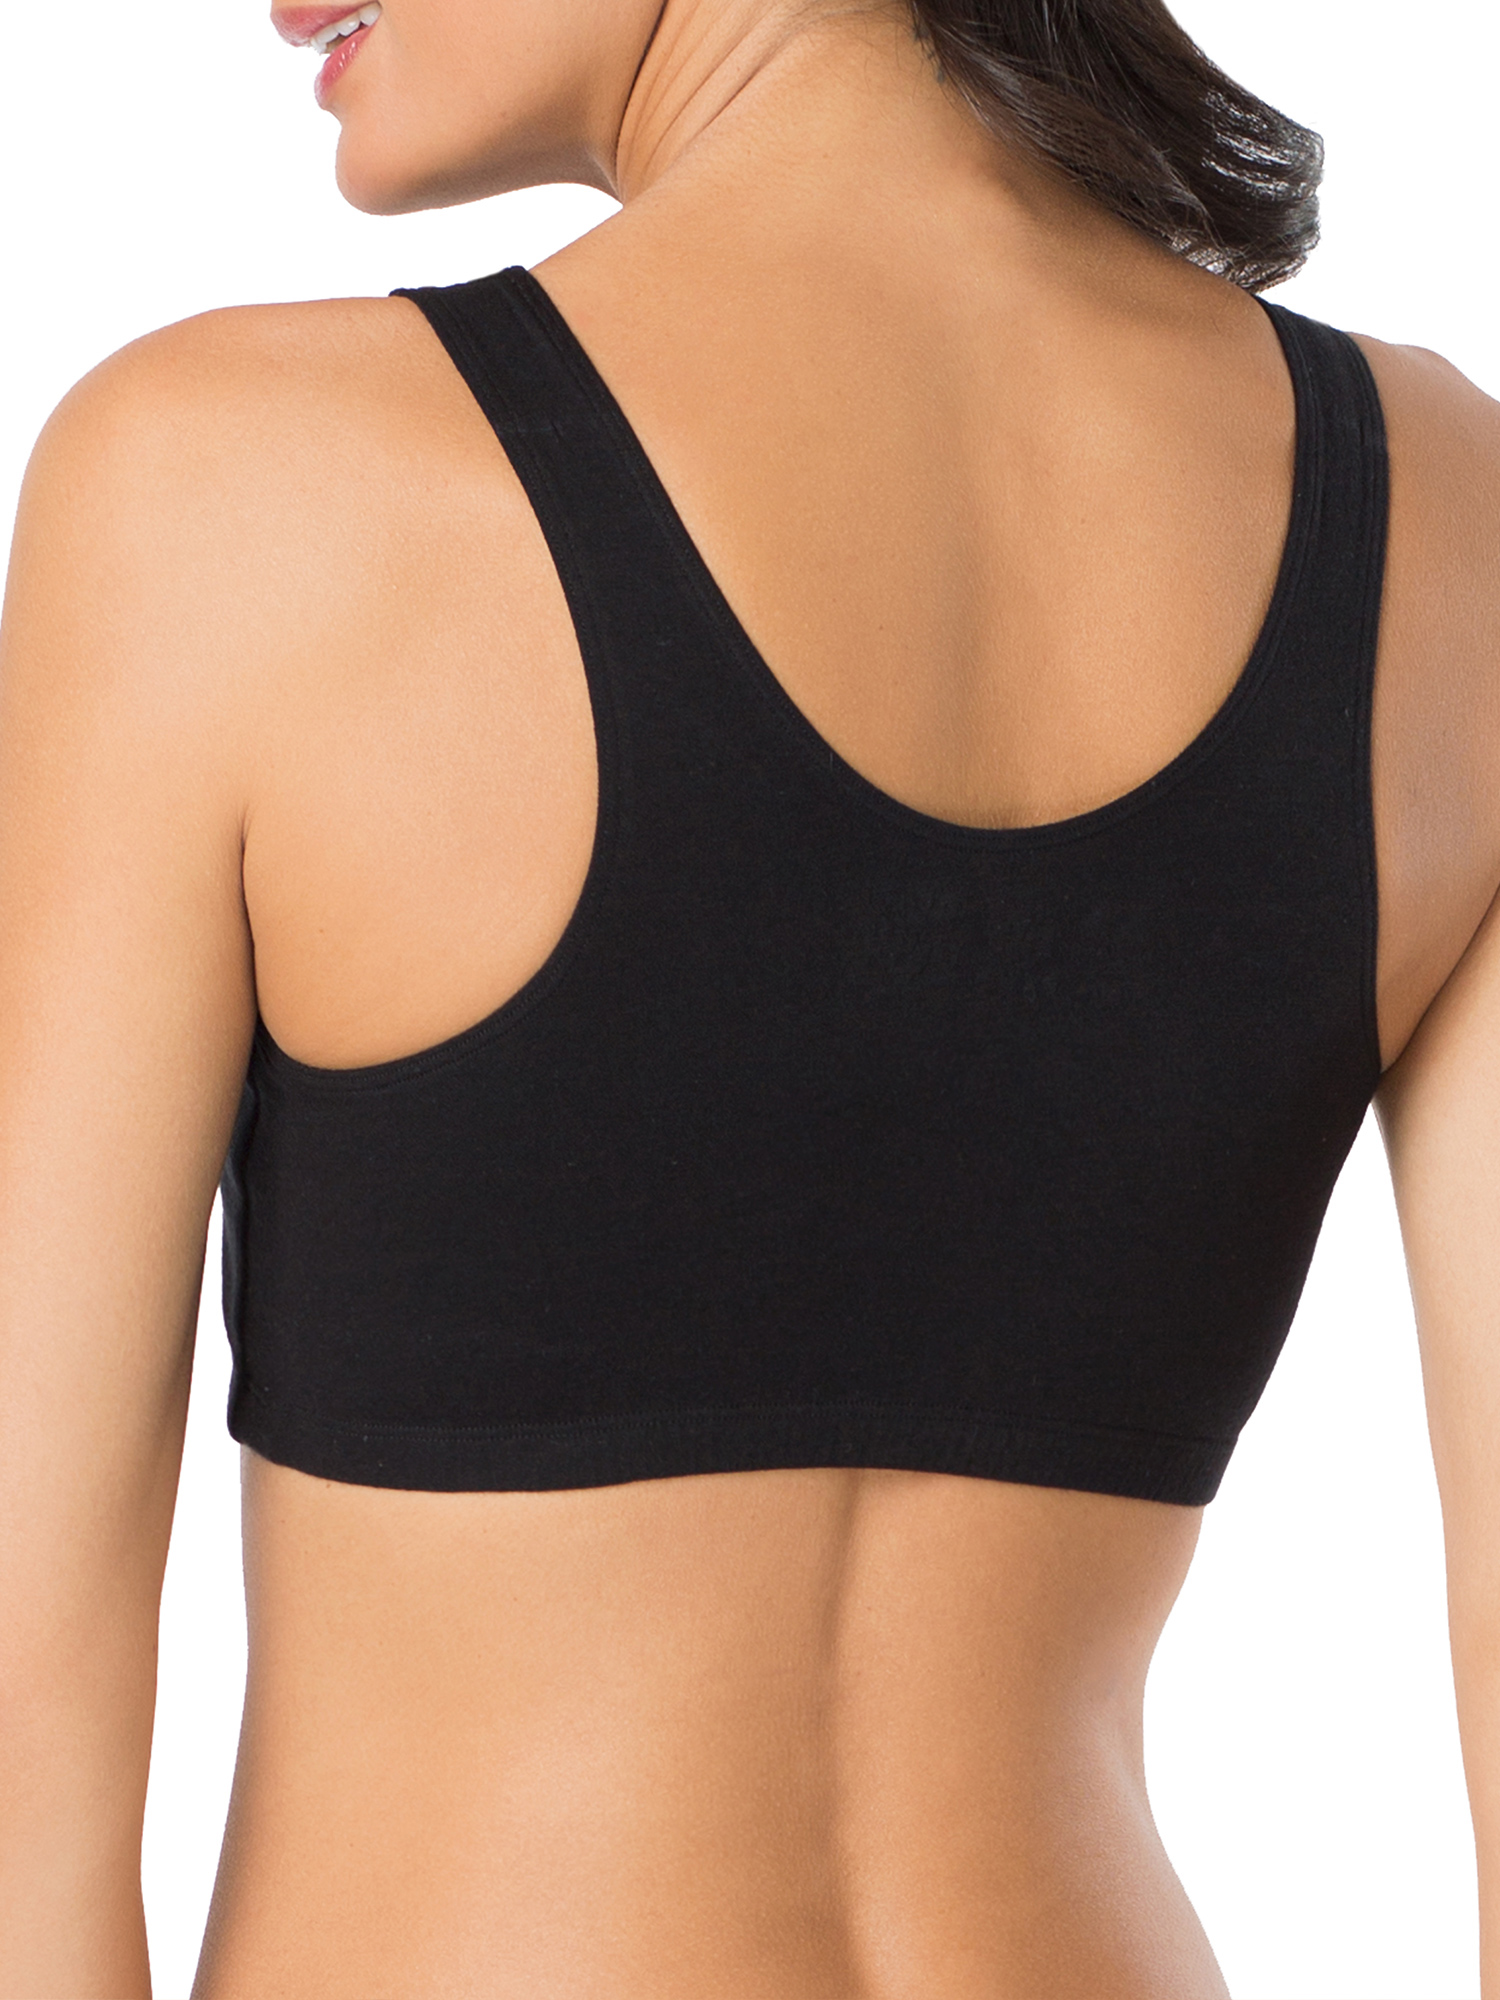 Fruit of the Loom Women's Tank Style Cotton Sports Bra, 3-Pack, Style-9012 - image 4 of 9